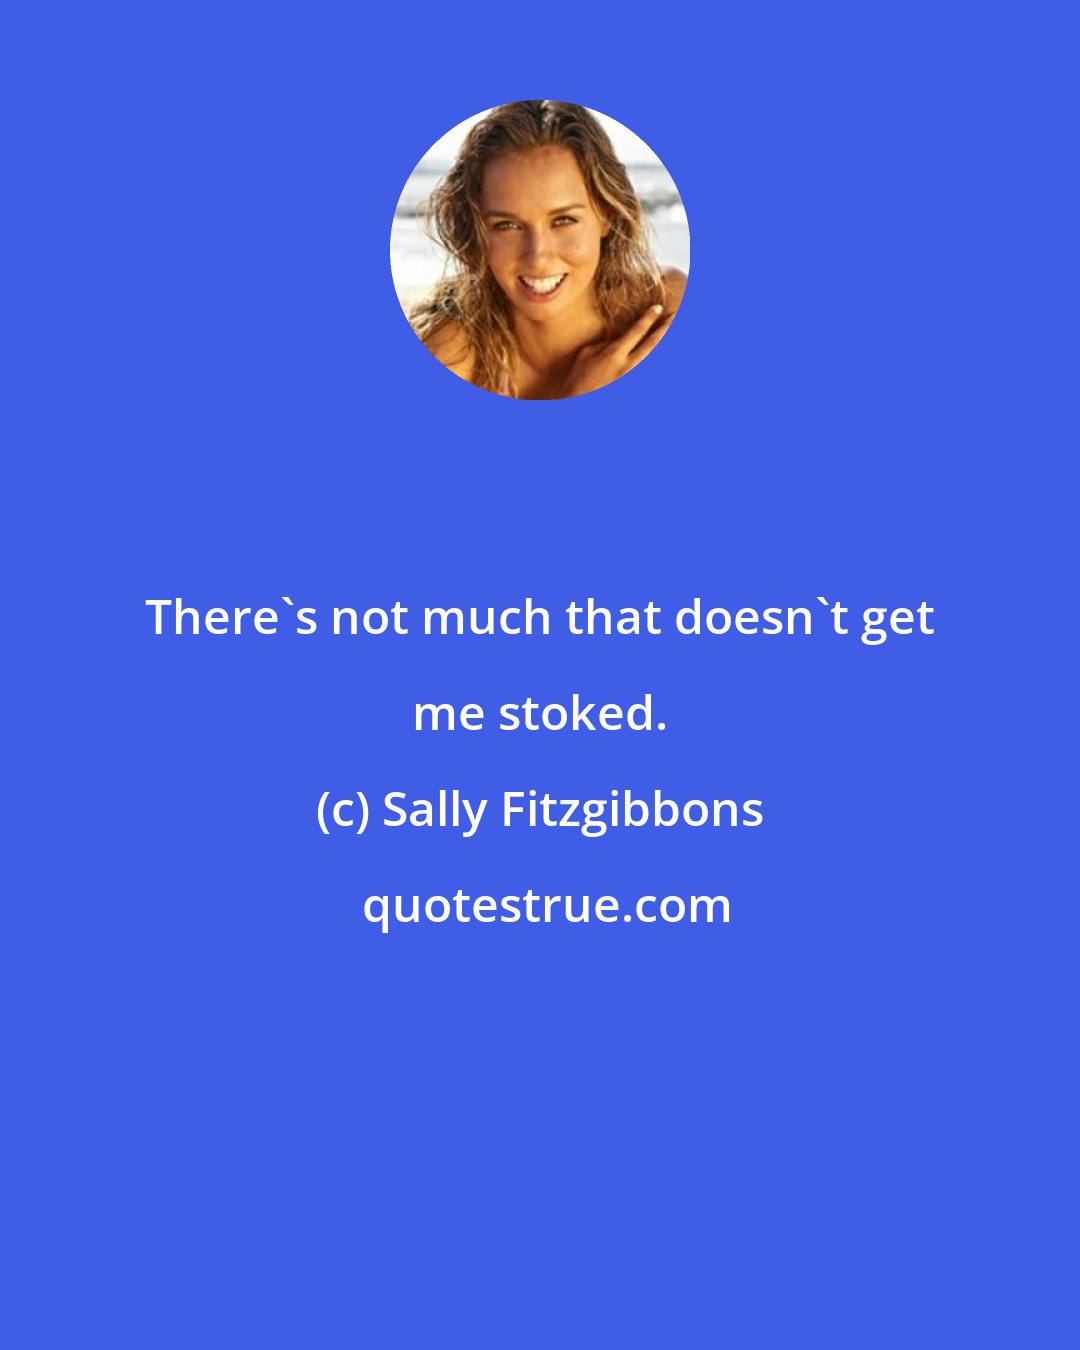 Sally Fitzgibbons: There's not much that doesn't get me stoked.